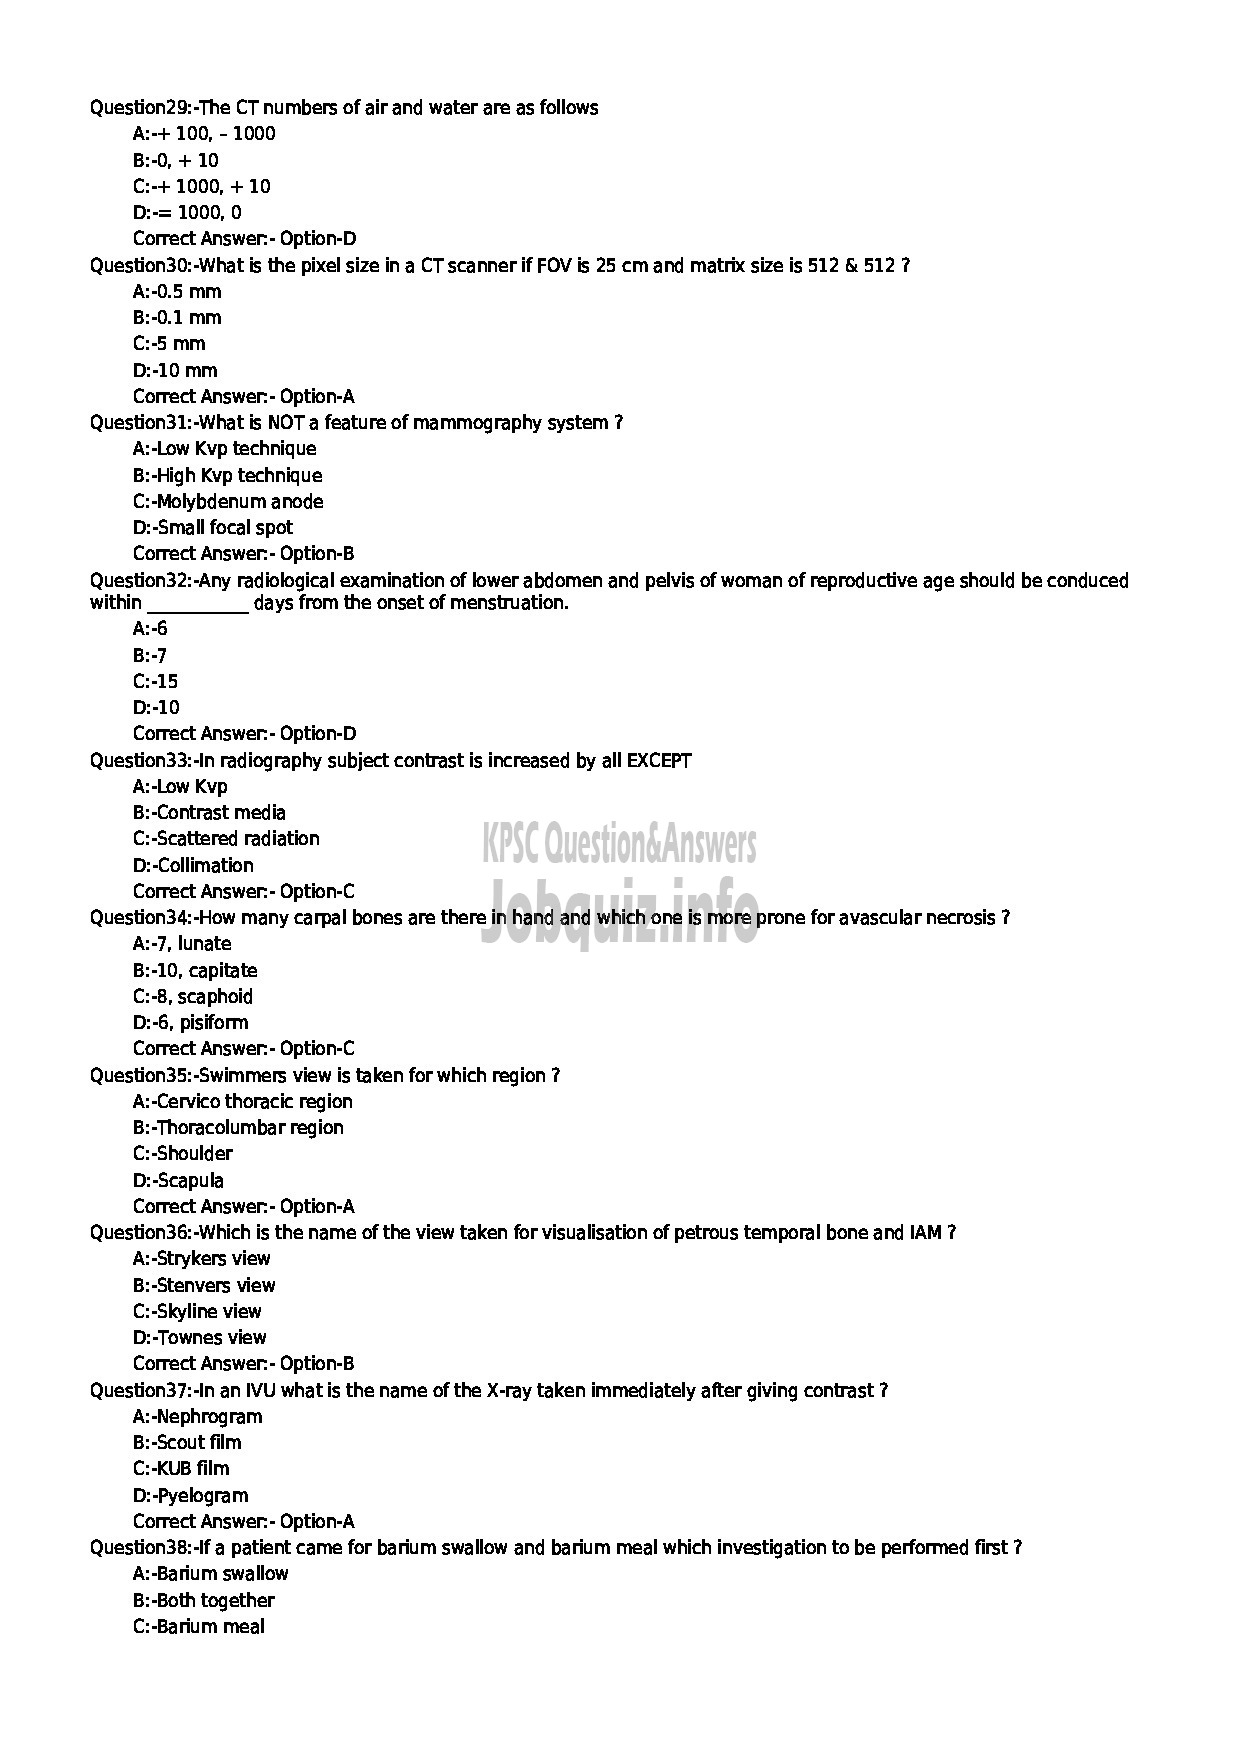 Kerala PSC Question Paper - RADIO GRAPHER GR II NCA OX HEALTH SERVICES-4